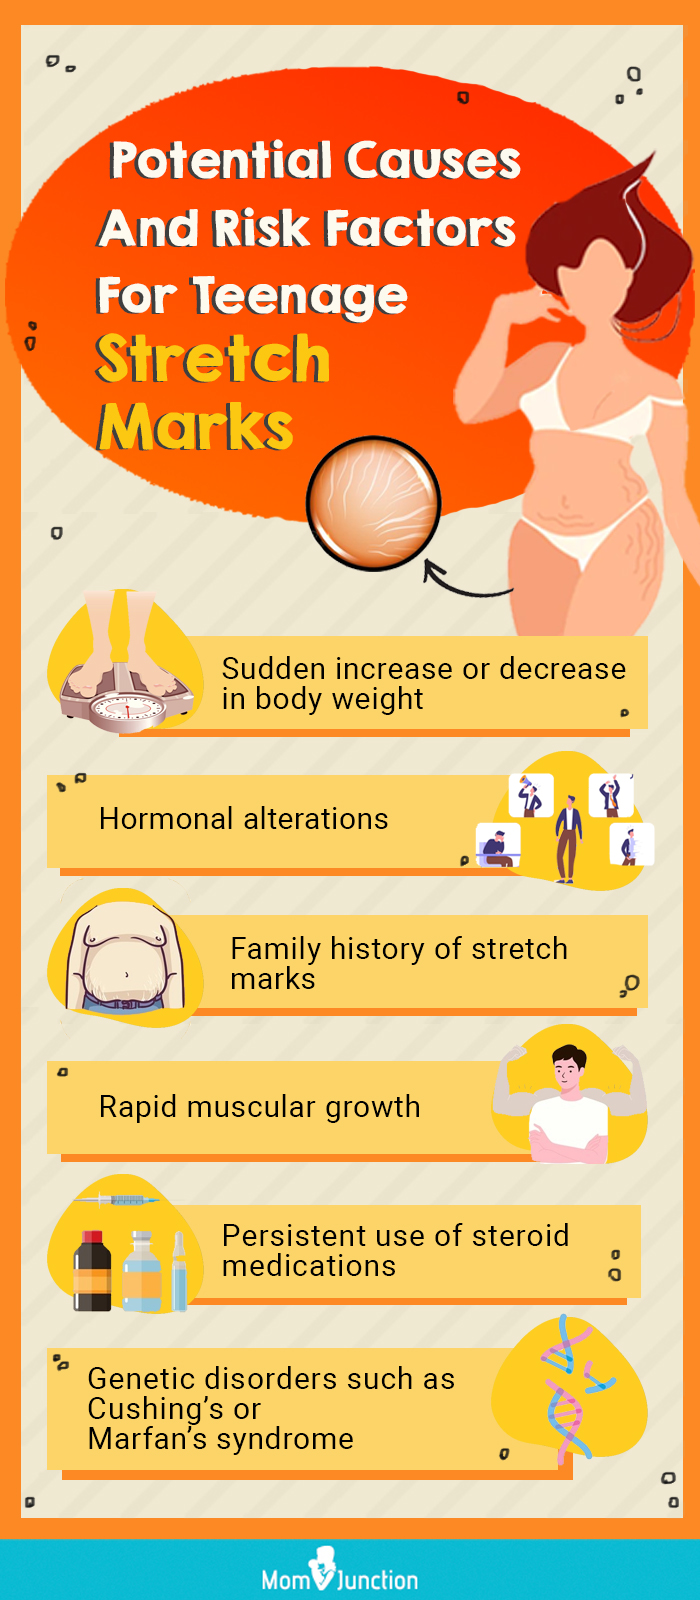 potential causes and risk factors teenage stretch marks (infographic)